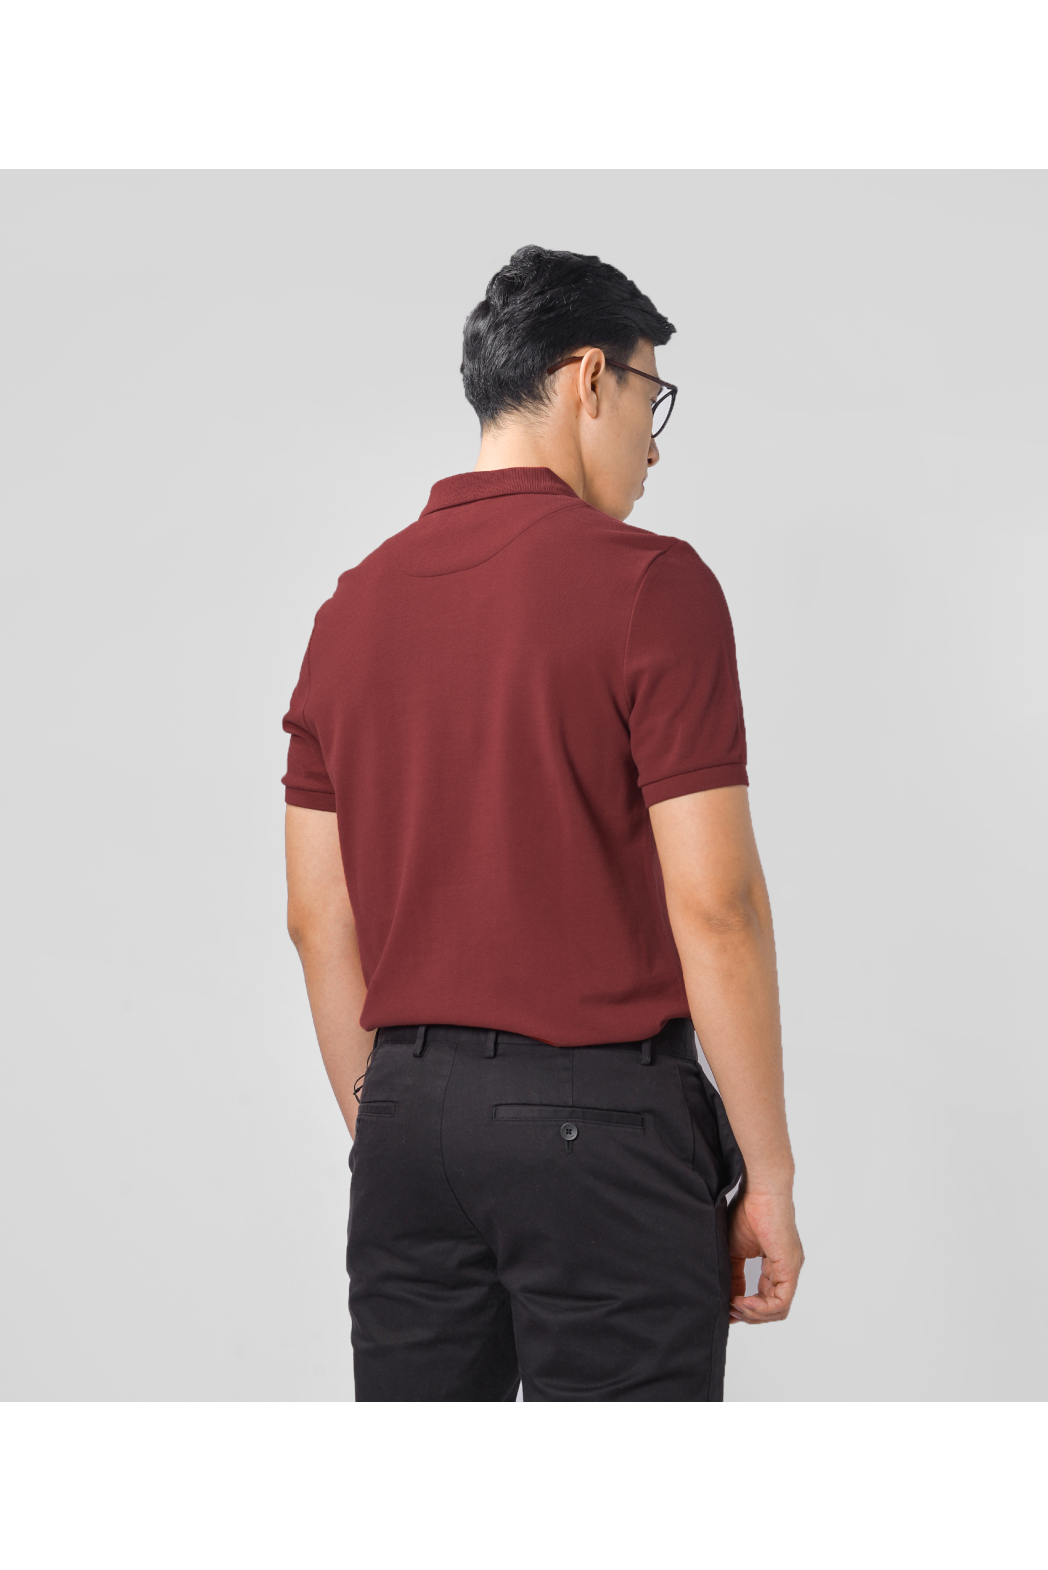 Áo polo contrast with Rib. FITTED form - 10F20POL003